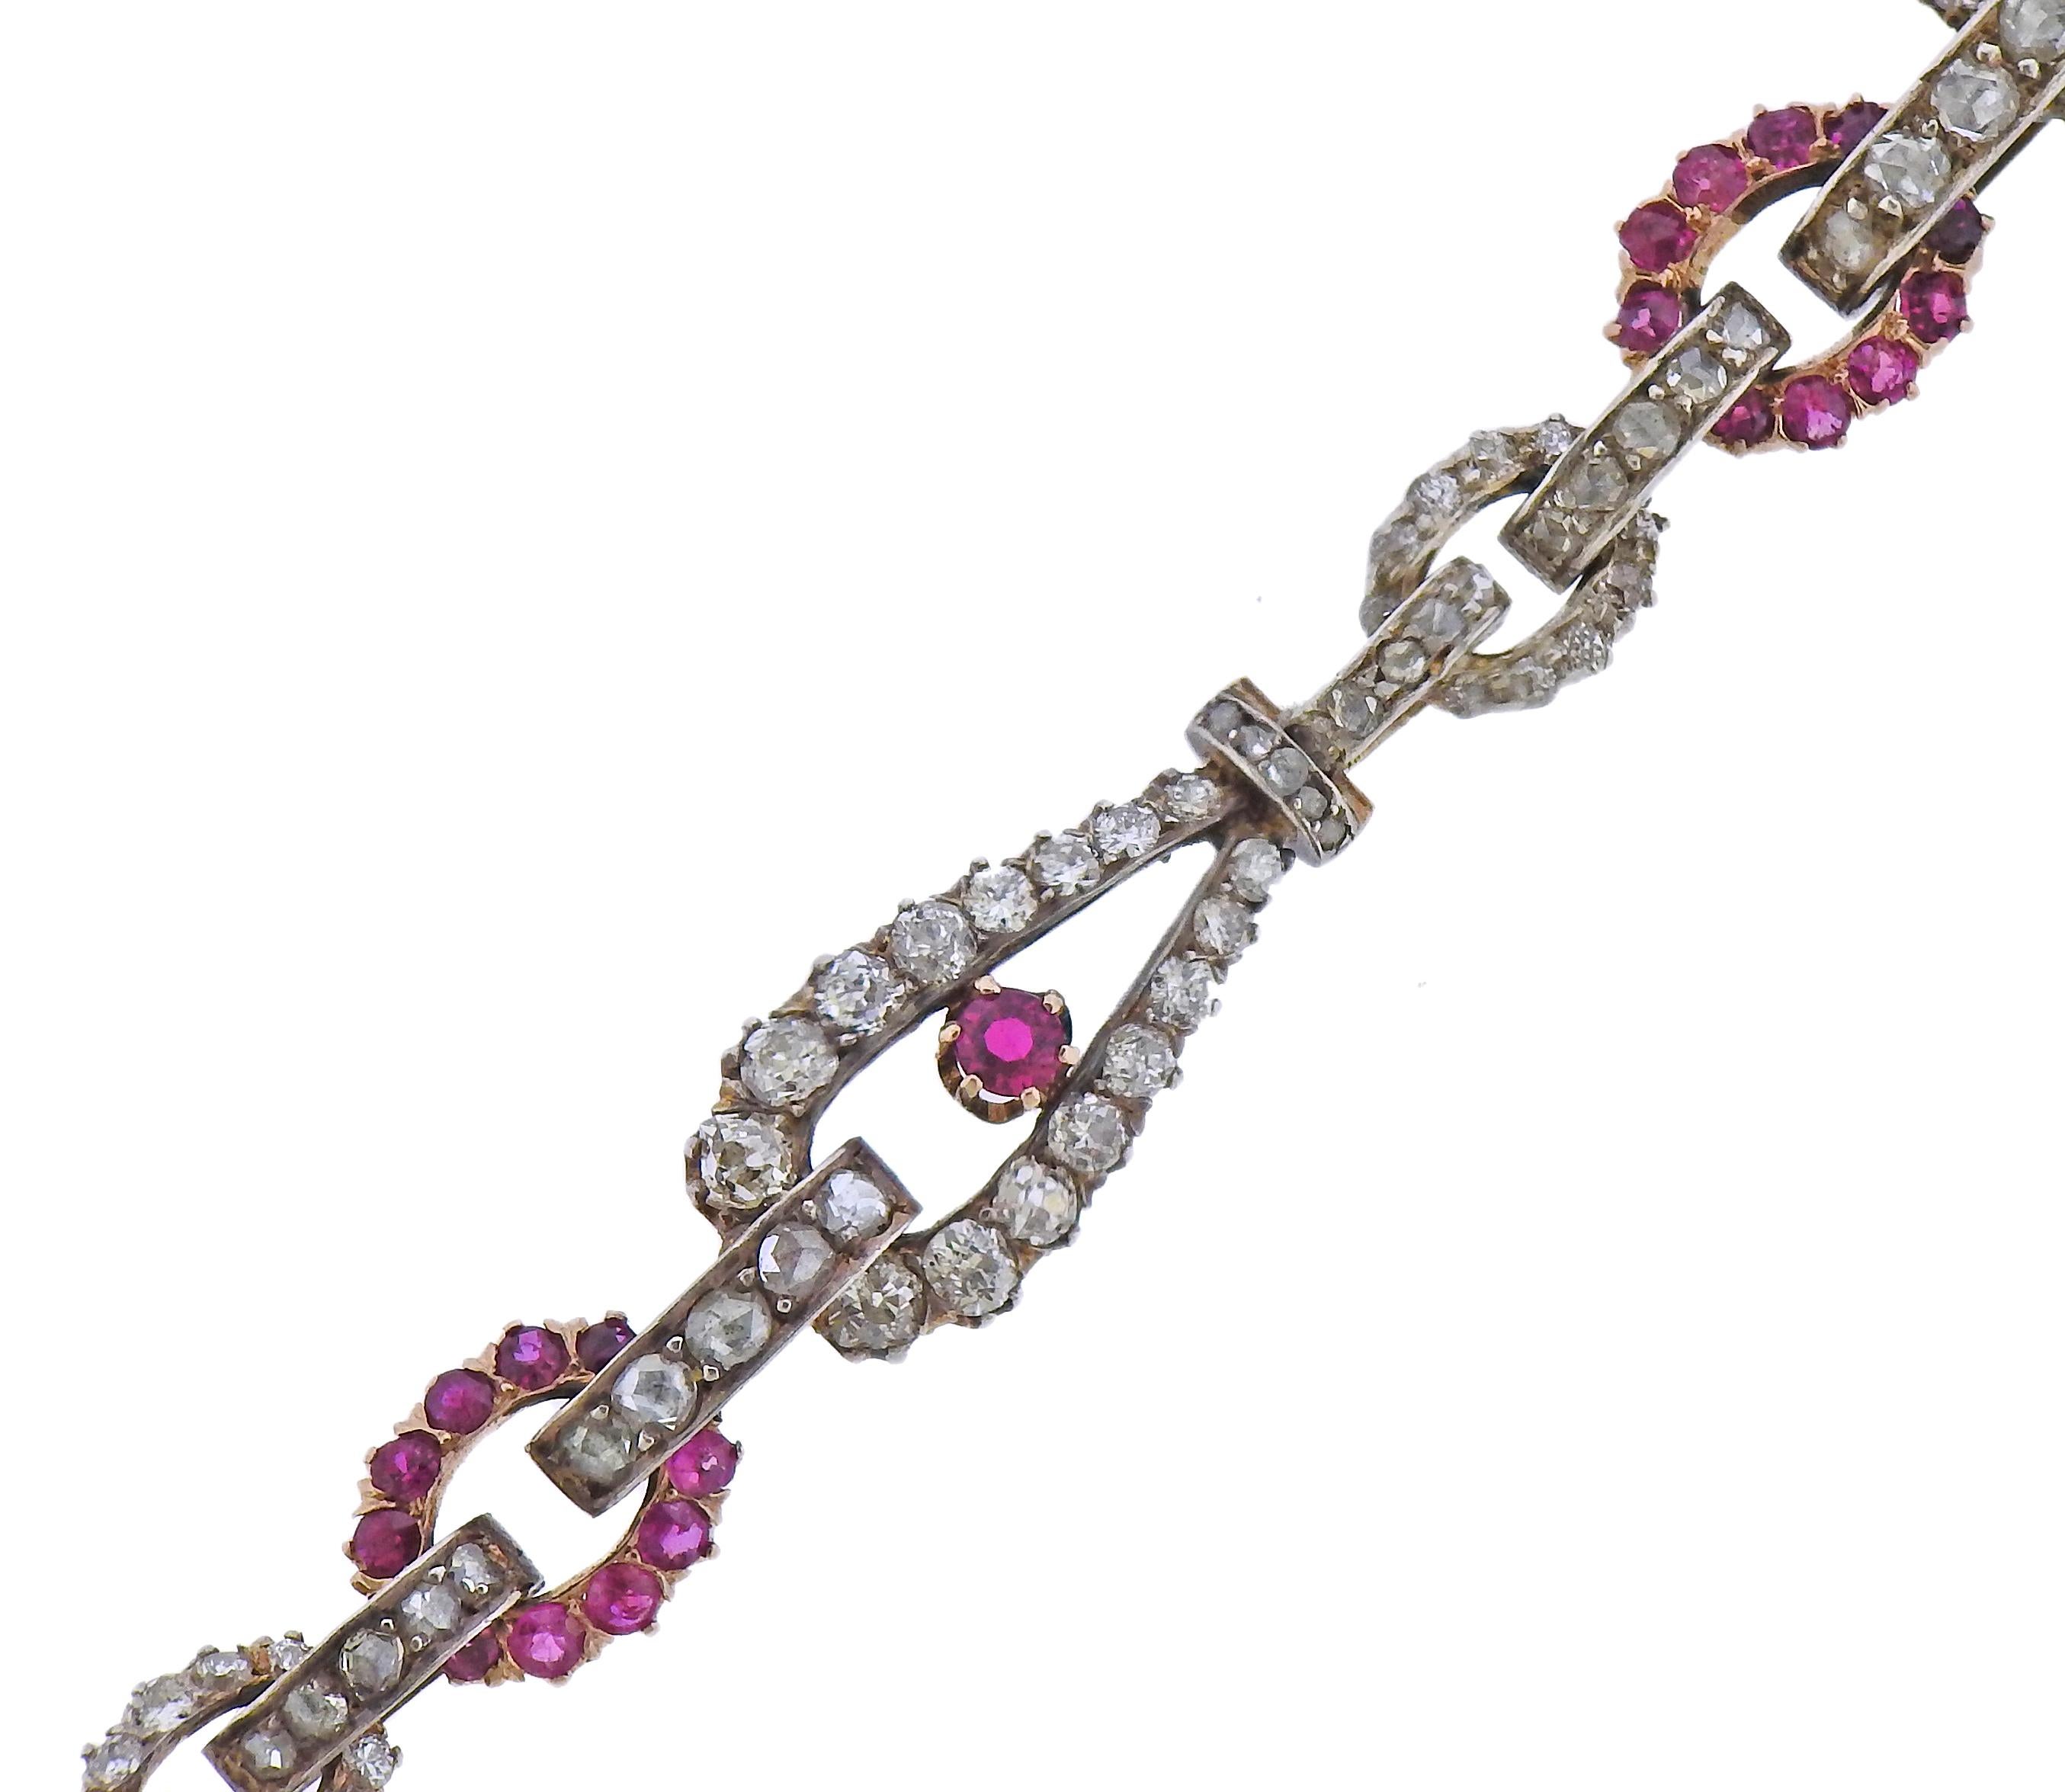 Antique 14k gold bracelet with rubies and a combination of old mine and rose cut diamonds. Bracelet is 6.5' long (chain is not original/antique). Bracelet is 10mm wide. Weight - 11.6 grams. 